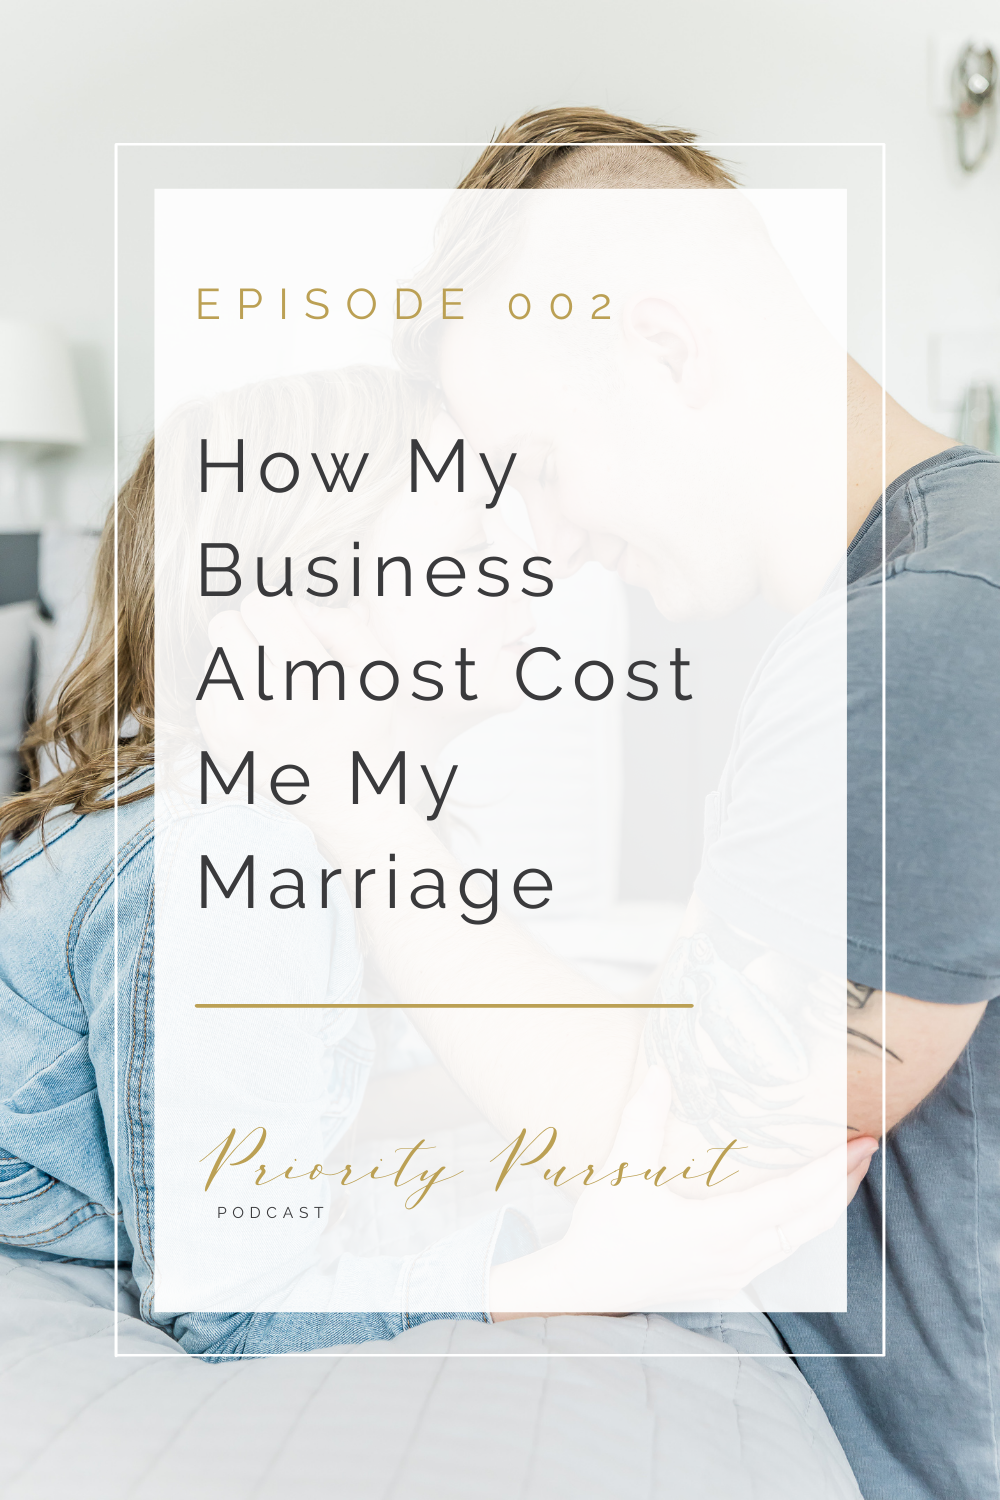 Episode 002 of The Priority Pursuit Podcast explains how my business almost cost me my marriage and how you can protect your most important relationships from your business